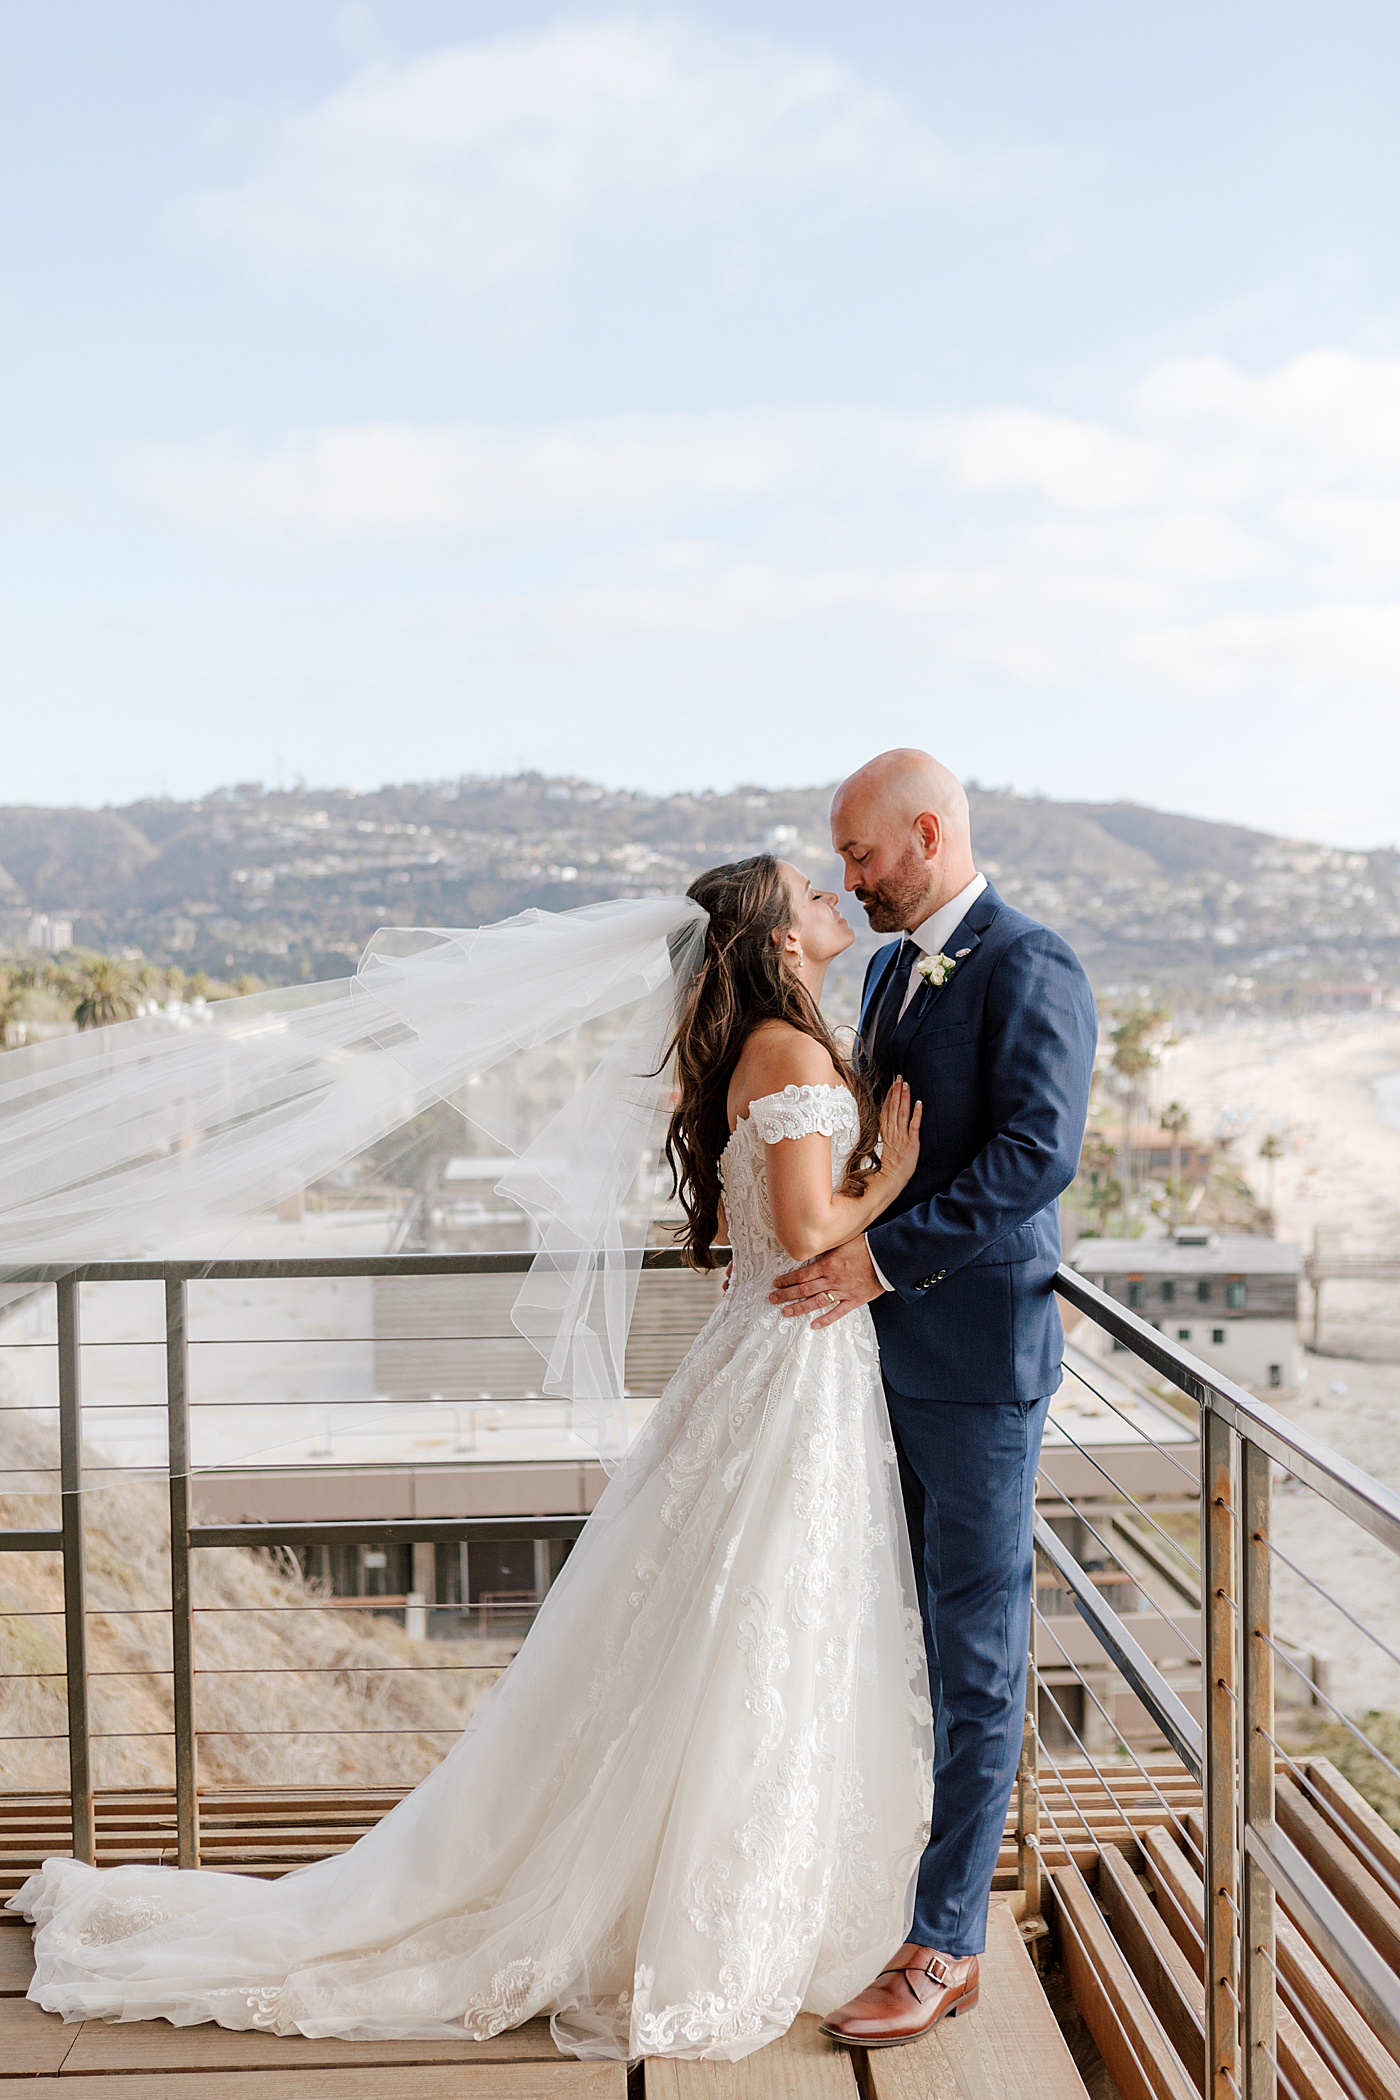 Close up of a groom in navy suit and bride in wedding dress standing closely and looking each other on a wooden balcony that overlooks a tropical, sunny city | Image by San Diego Wedding Photographer Hope Helmuth